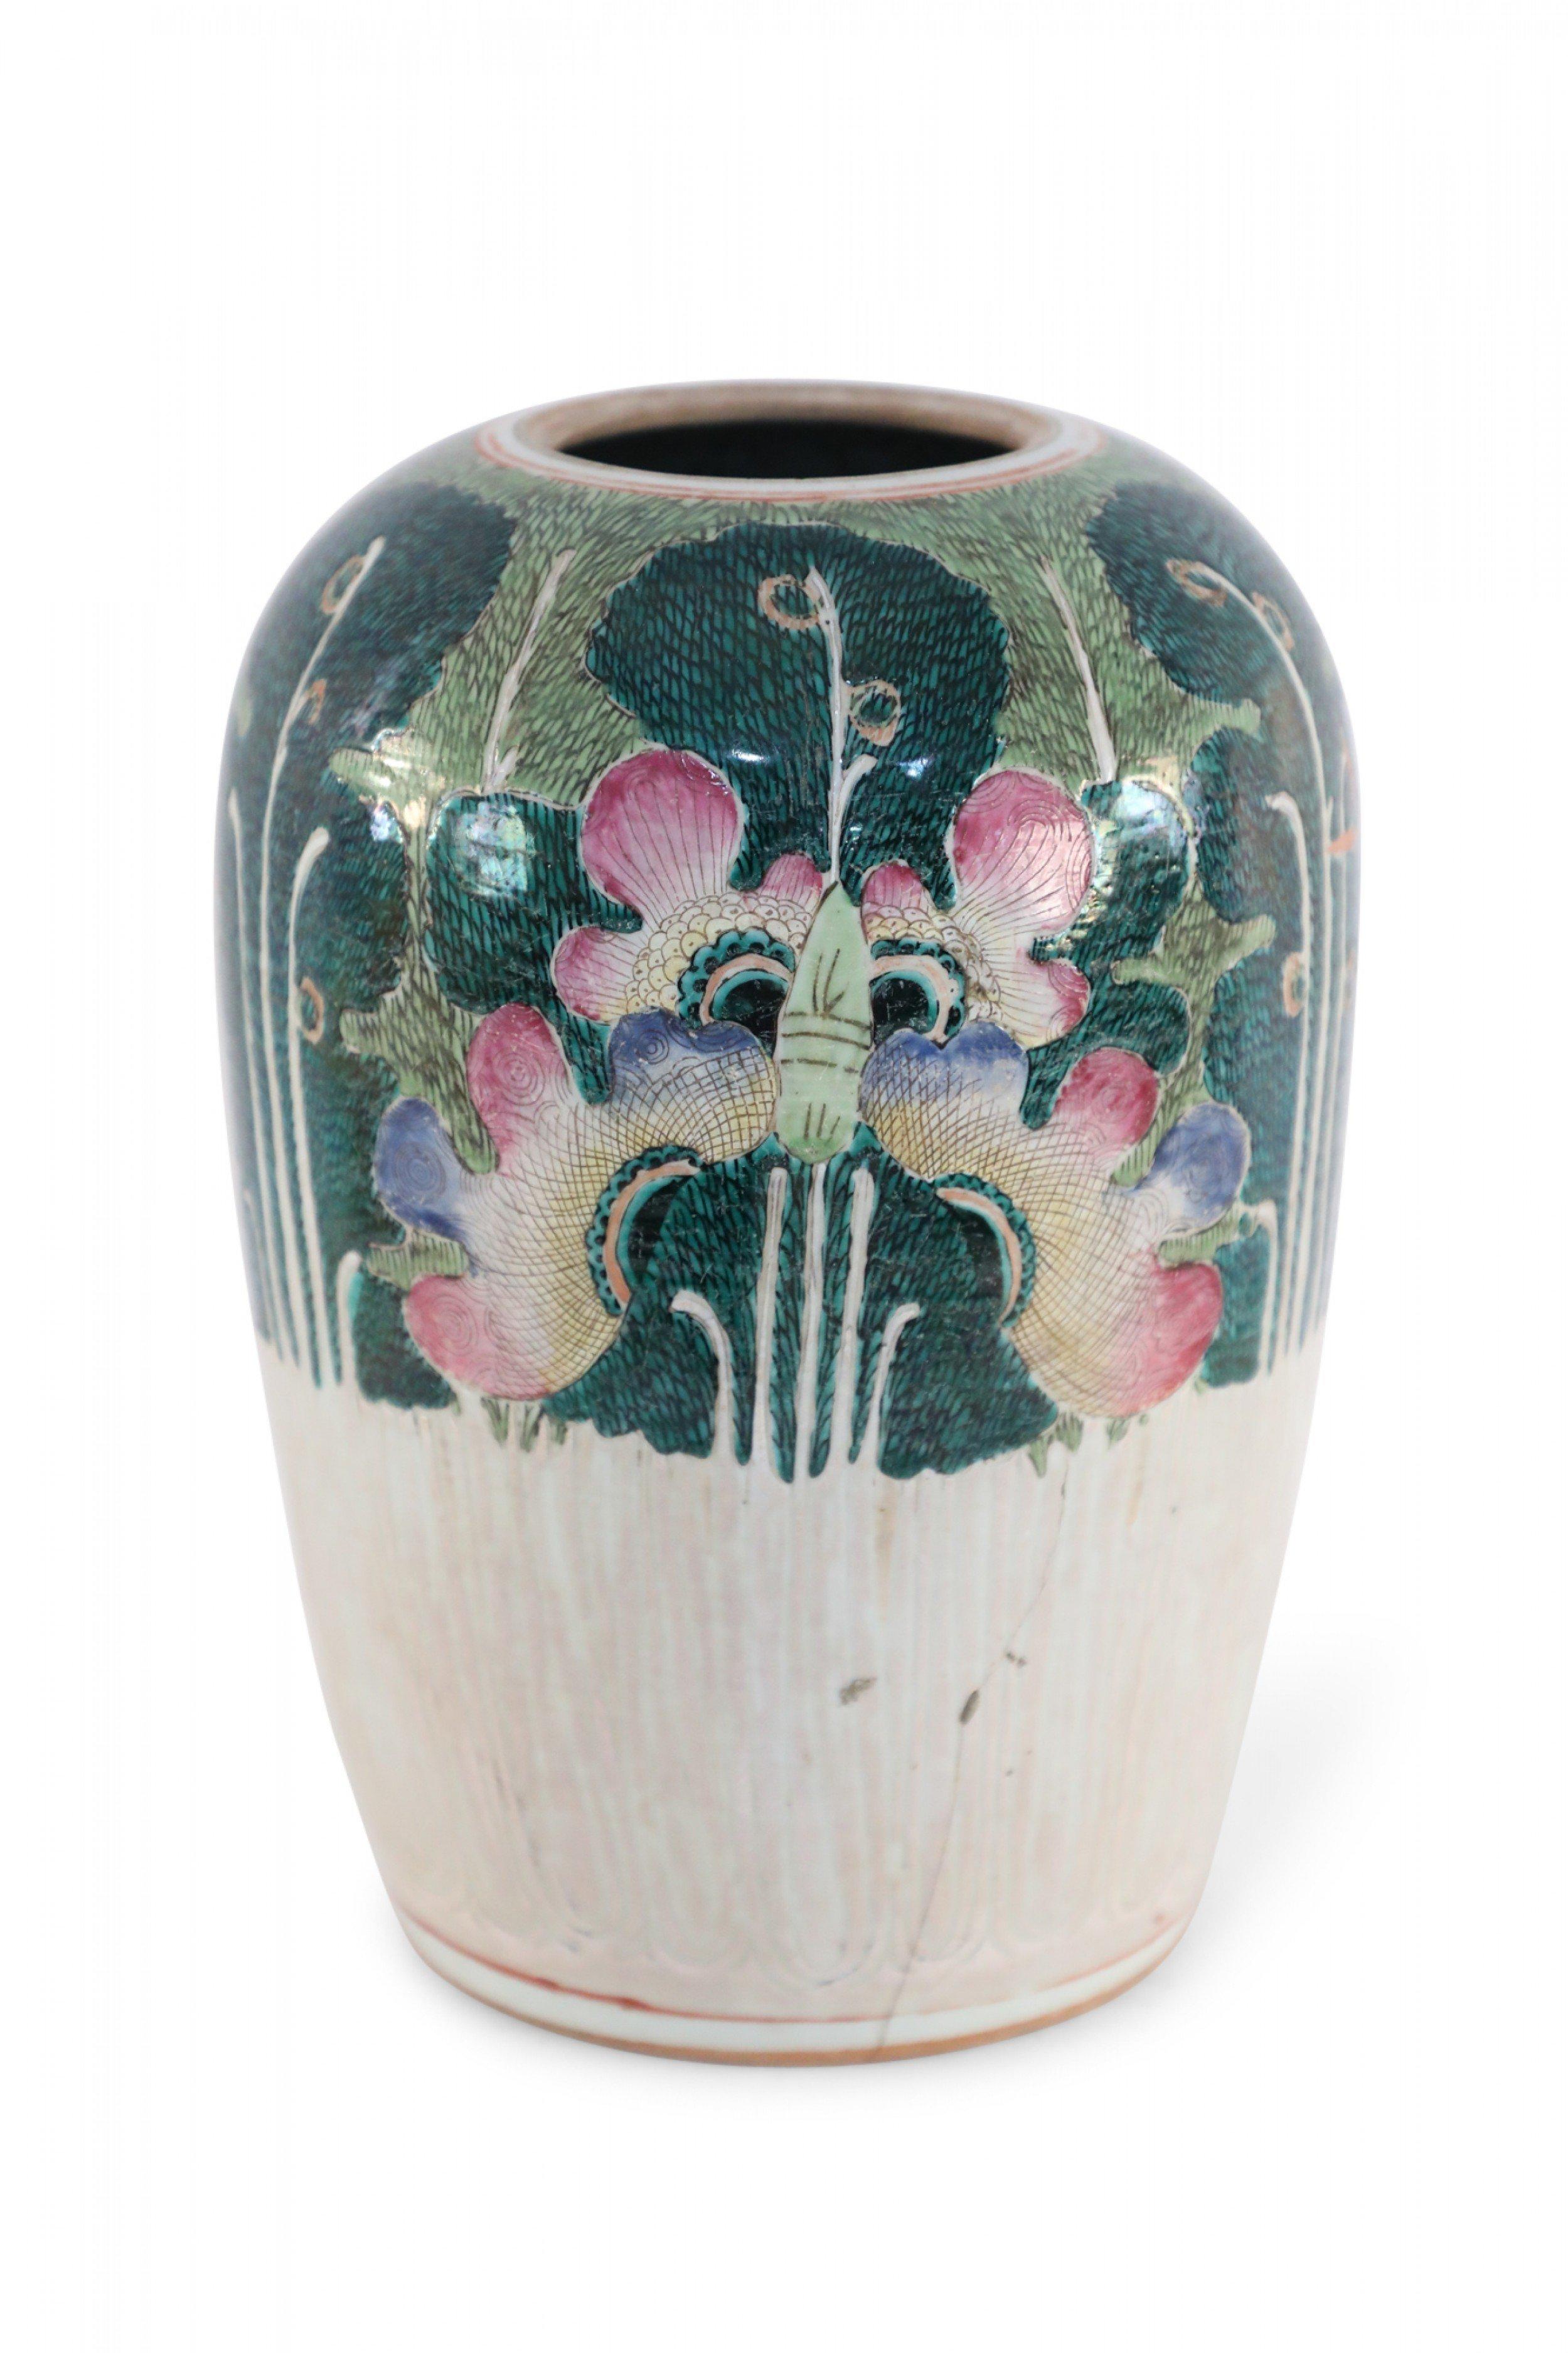 Chinese White and Green Vegetal Winter Melon Porcelain Vase For Sale 1